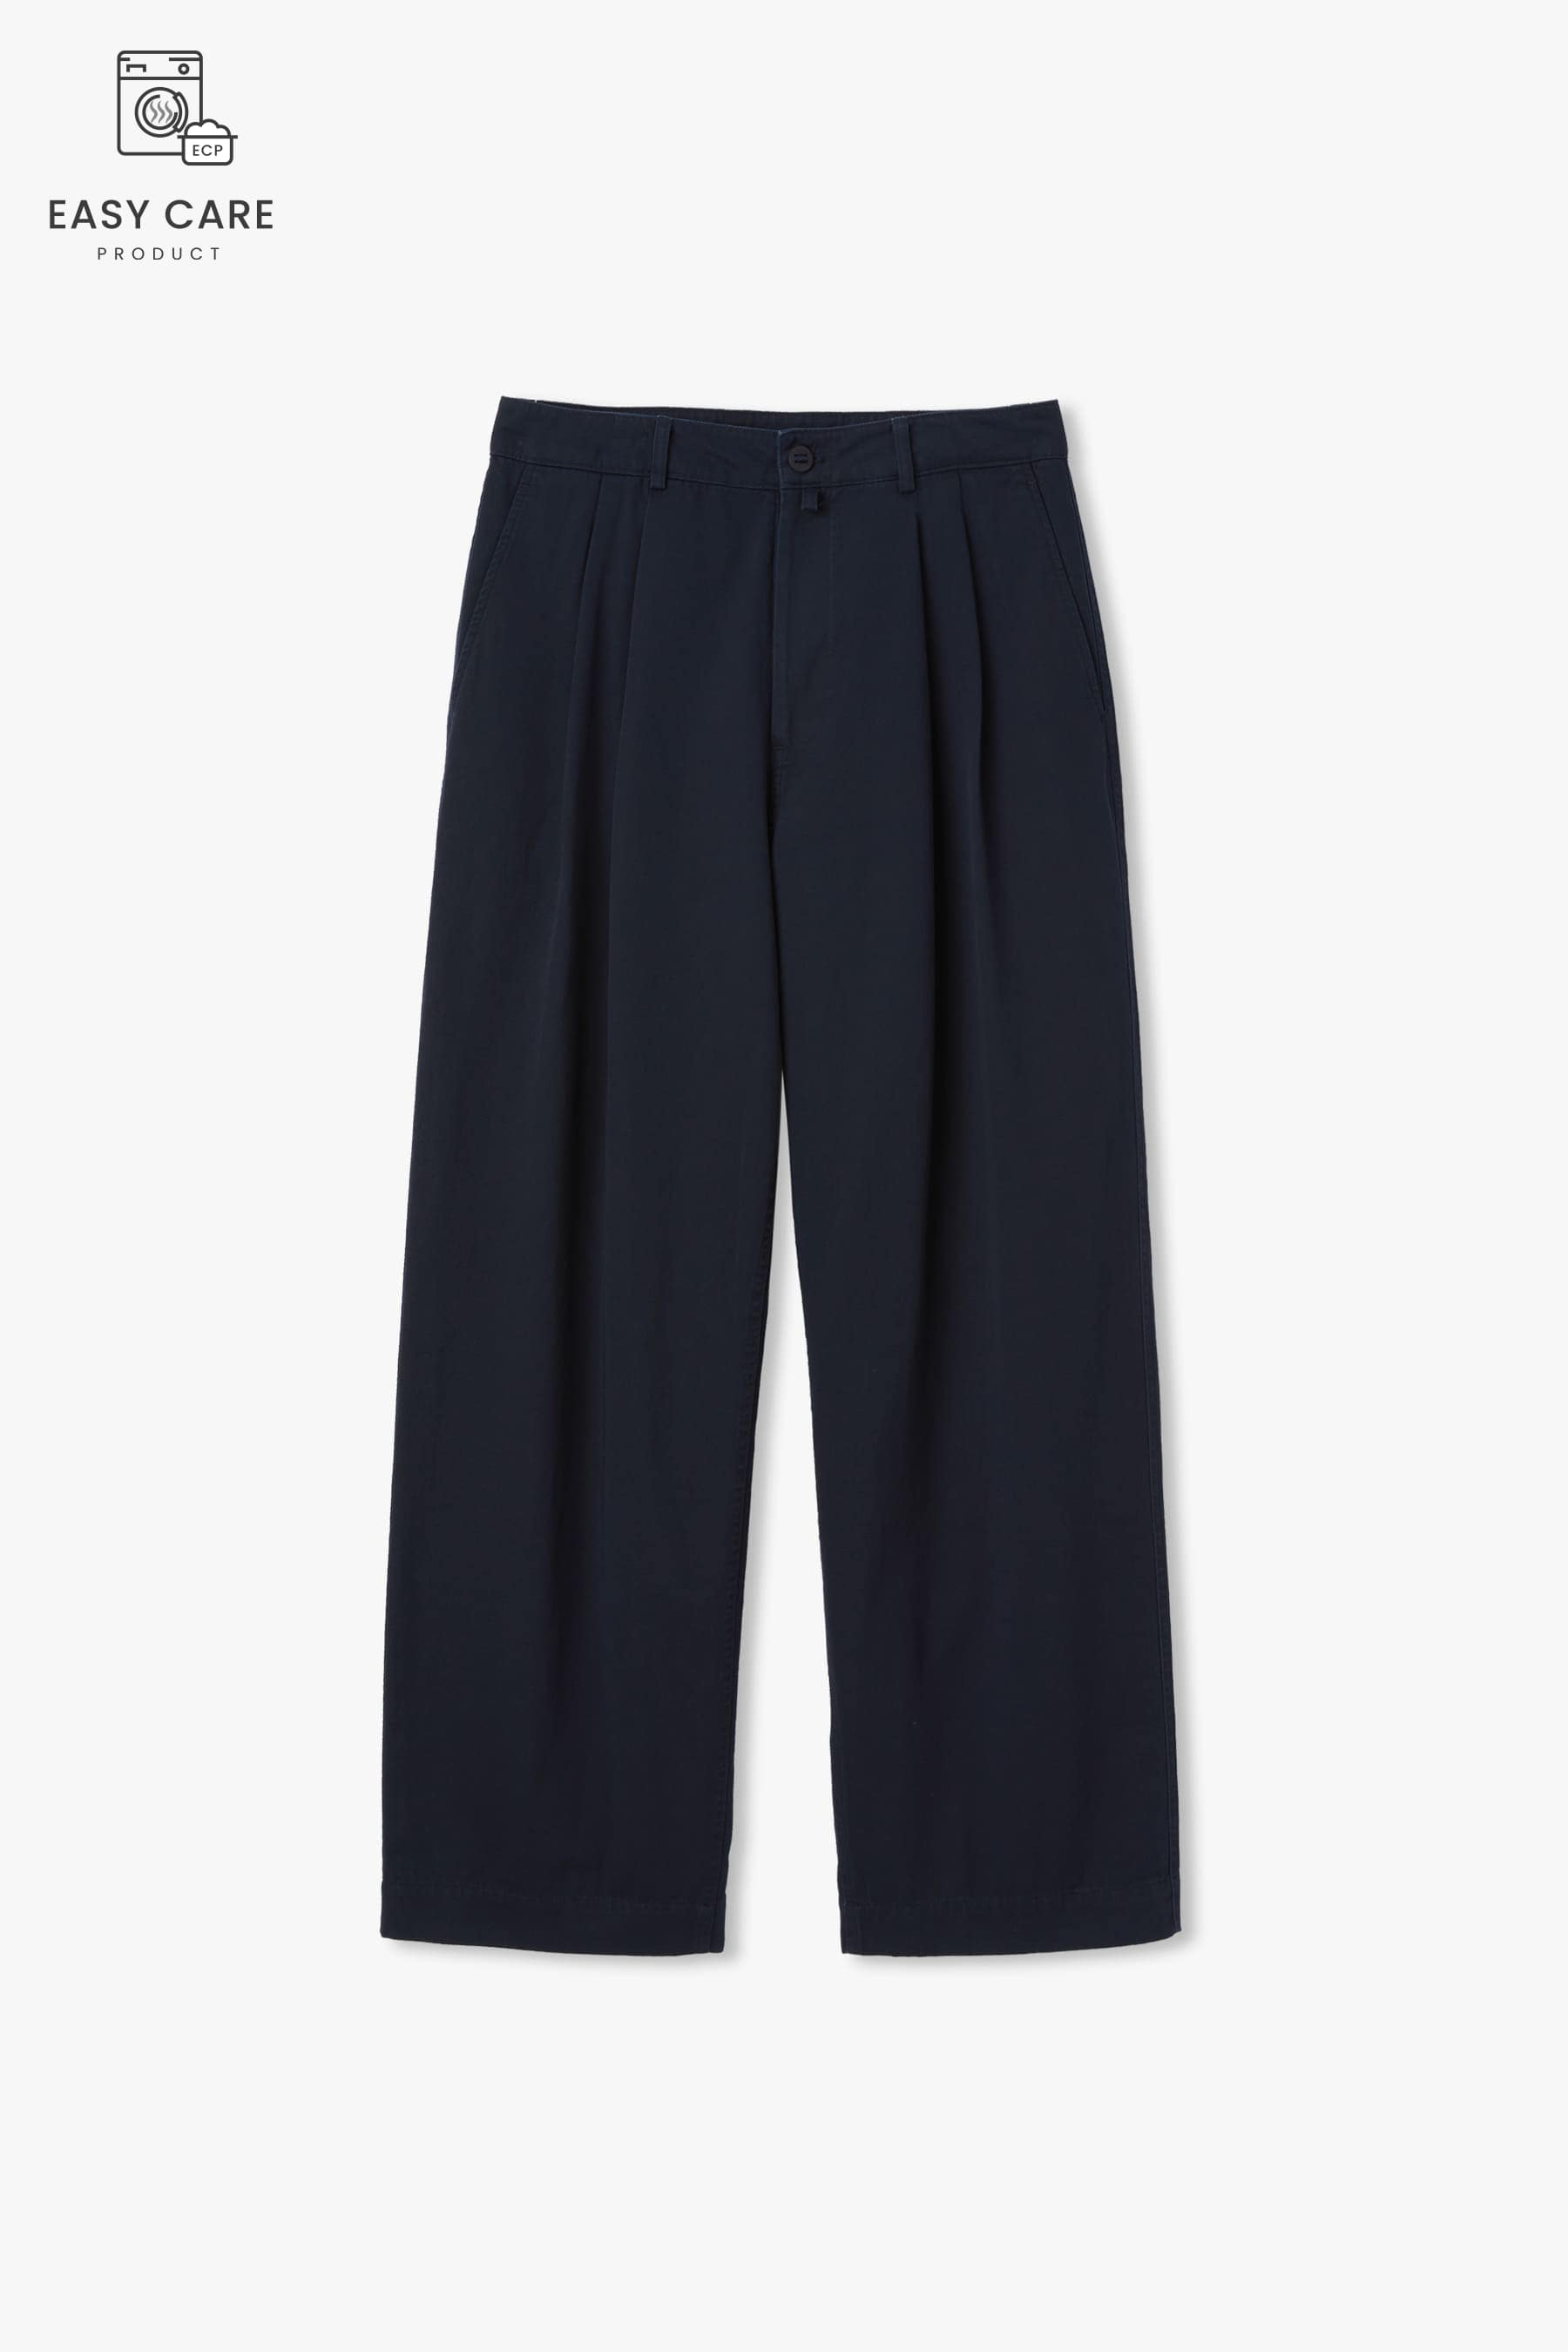 DEEP NAVY YRS Y-550 WASHED WIDE CHINO PANTS (ECP GARMENT PROCESS)